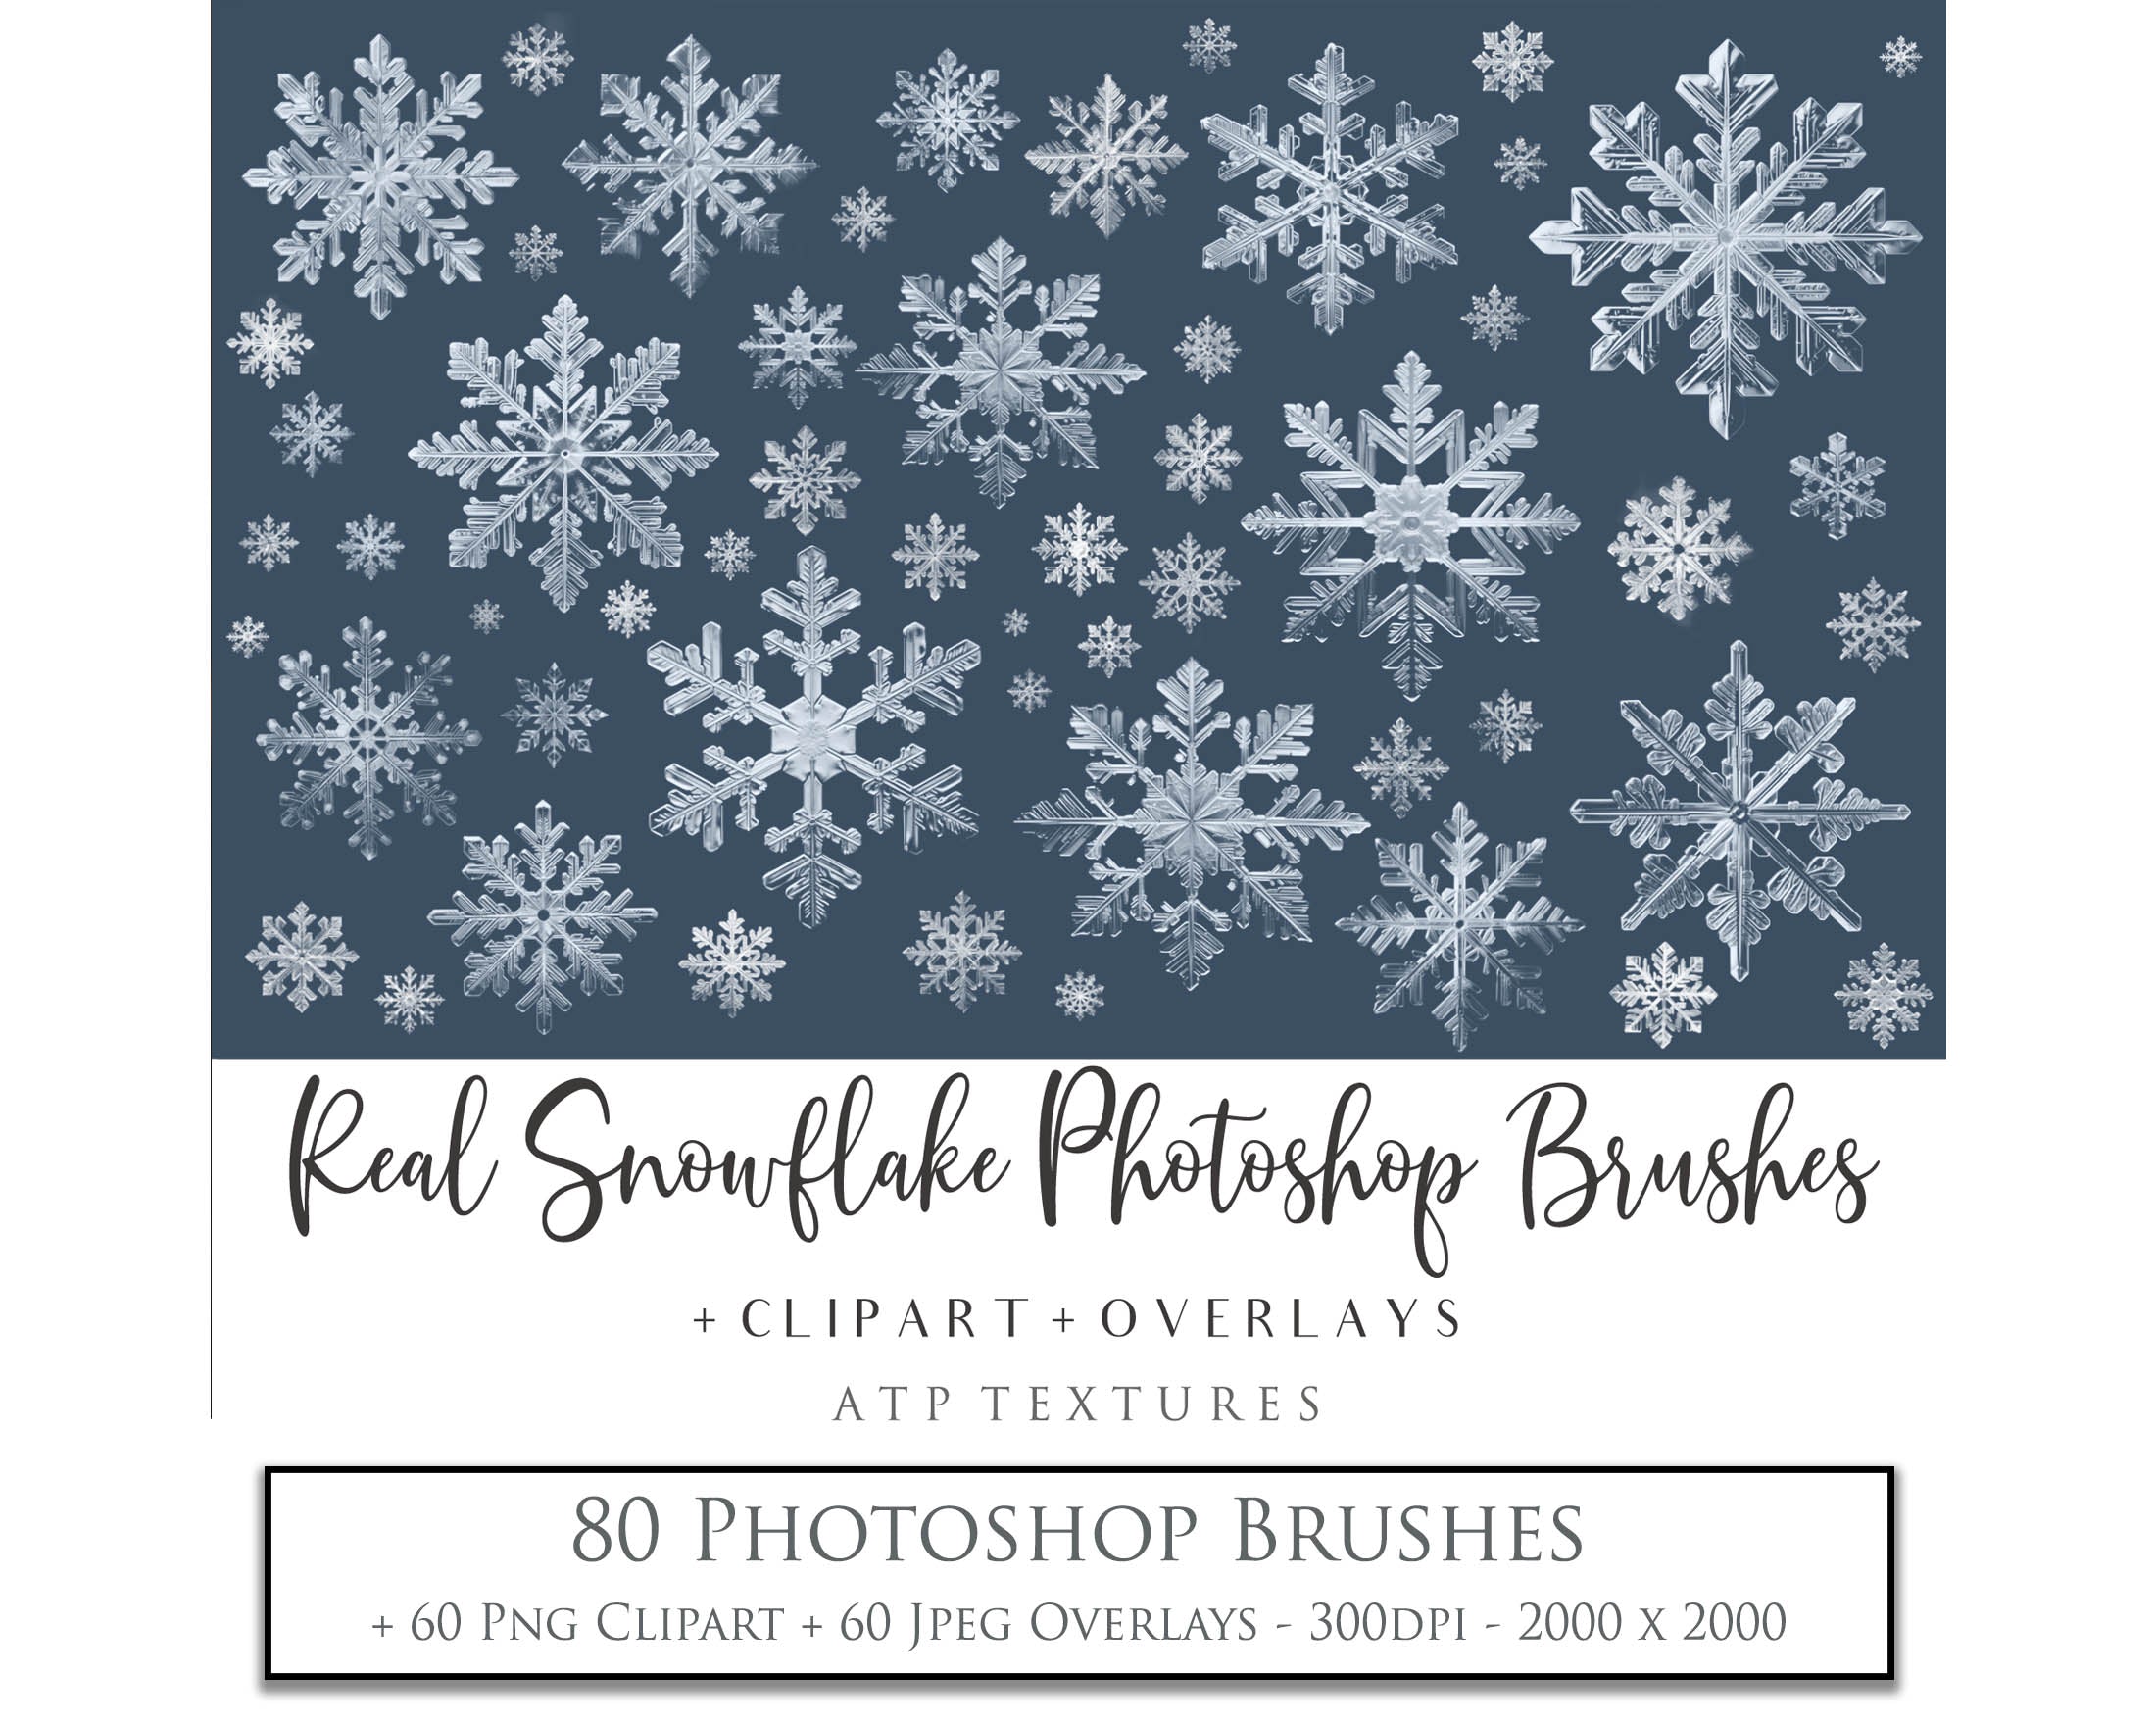 Real Snowflake Overlays & Brushes! A gorgeous addition to your beautiful photography, scrapbooking or digital art work! This set includes 60 Png Overlays 60 Jpeg Overlays 80 Photoshop brushes Instructions are included. All PNG overlays are 300dpi in high resolution.